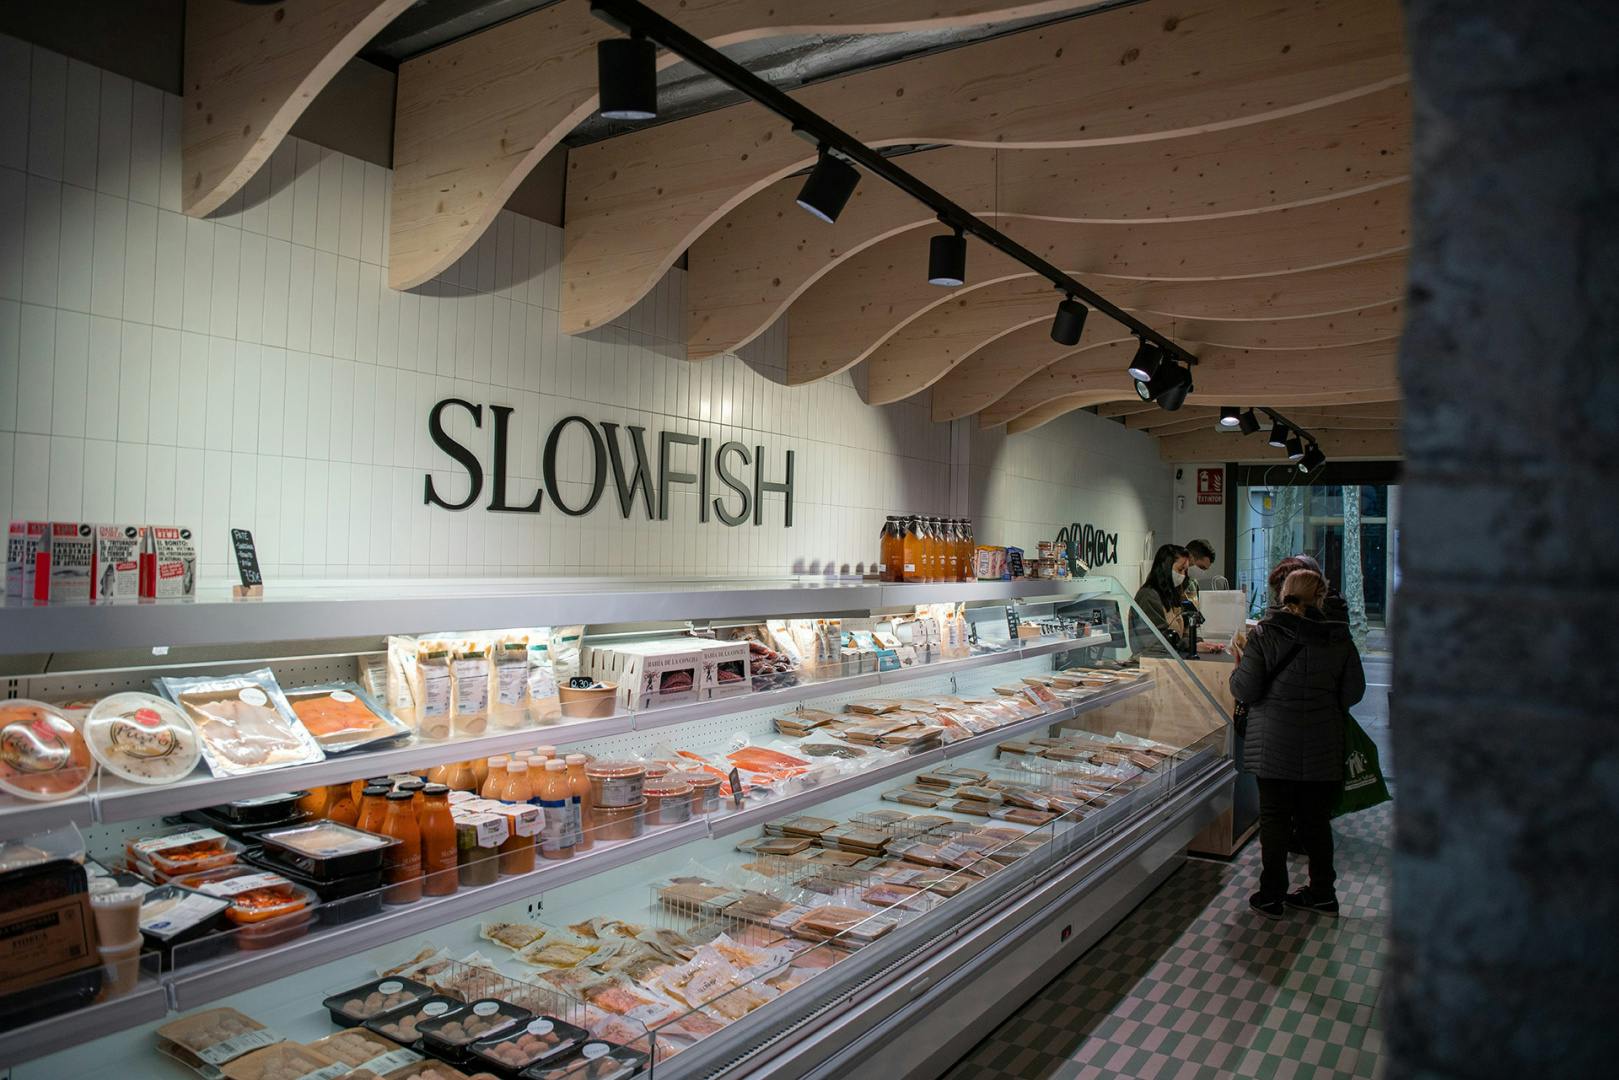 Photograph of a shop counter with Slowfish branding by Vasava featured on the wall behind